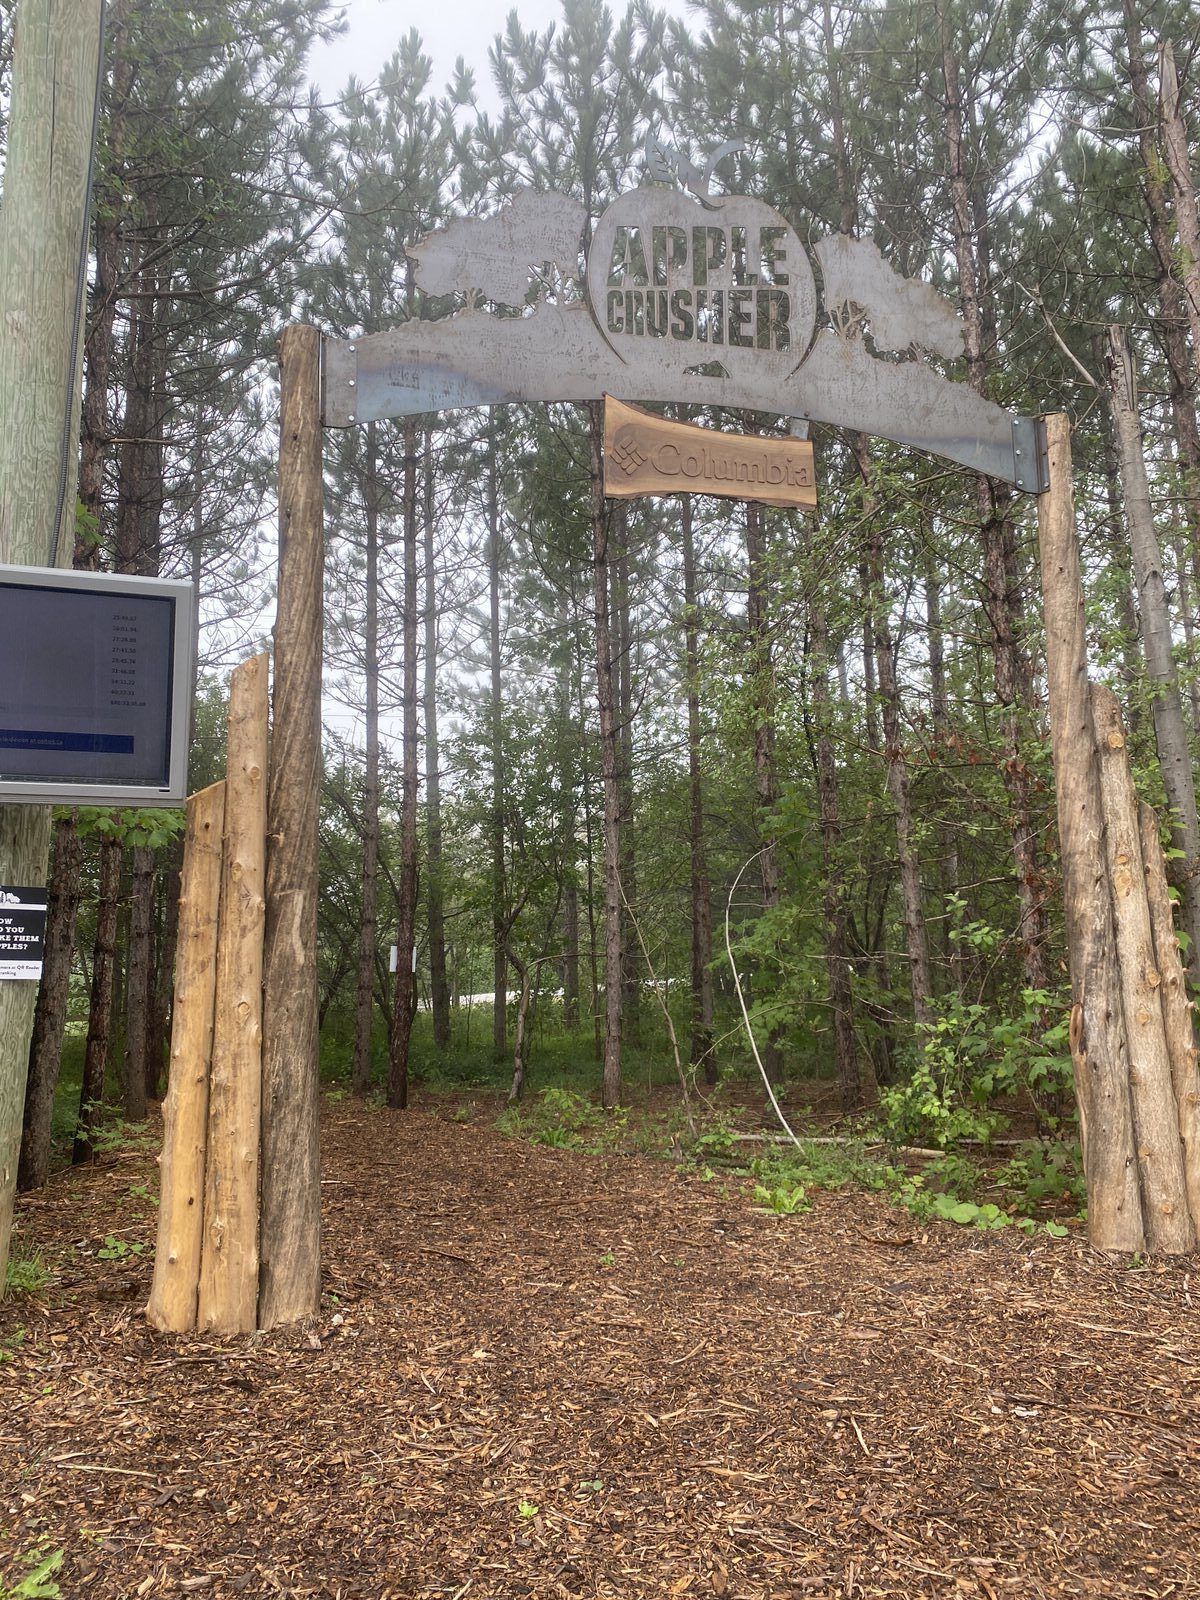 A rustic wooden archway labeled "Maple Crusher" marks the entrance to a forest trail. Behind the arch, tall trees line the path, and a small sign is visible to the right. The ground is covered in wood chips, and an information board stands to the left of the entrance.